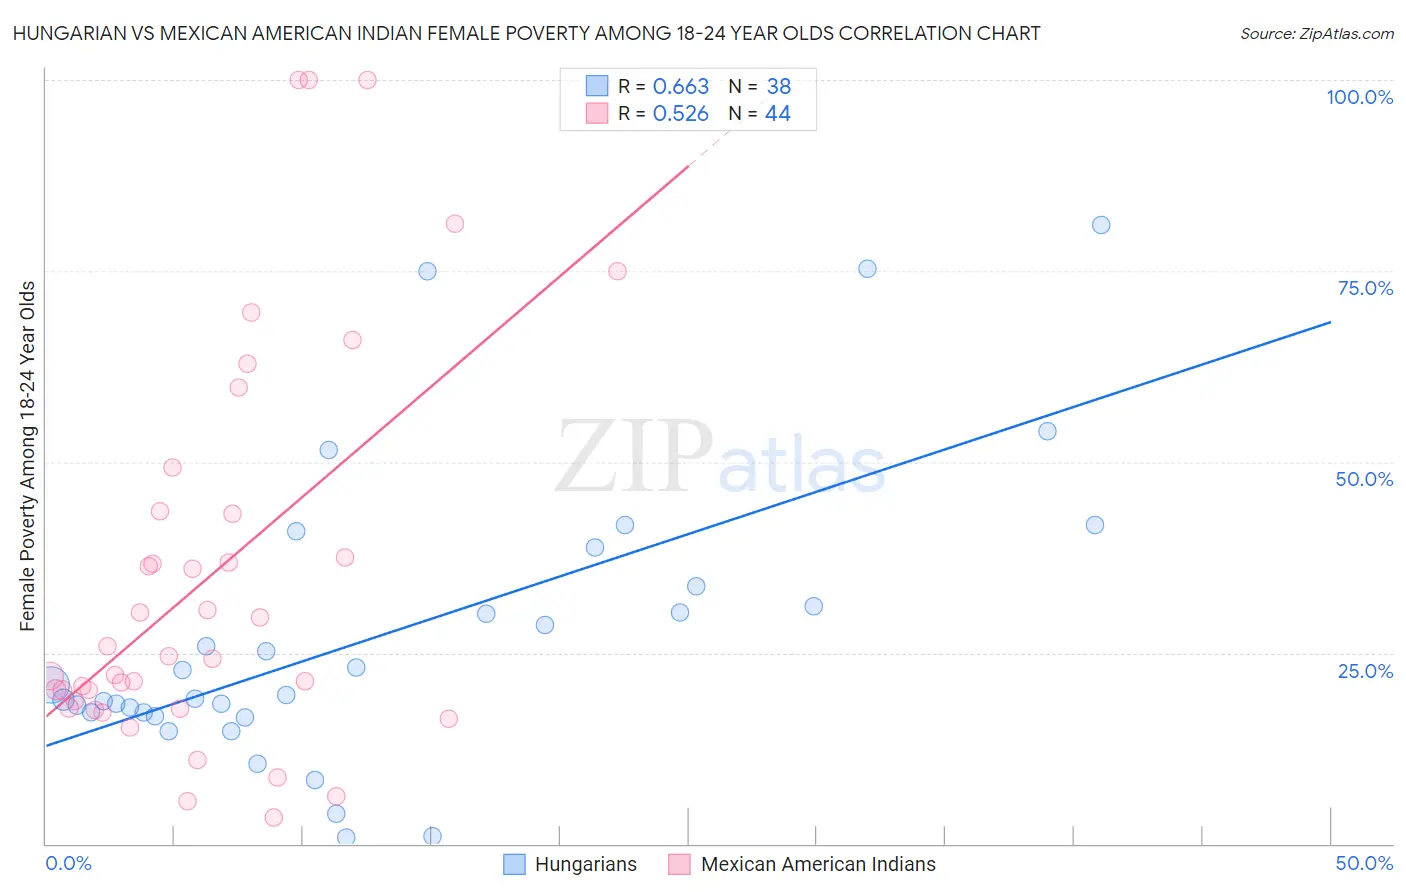 Hungarian vs Mexican American Indian Female Poverty Among 18-24 Year Olds